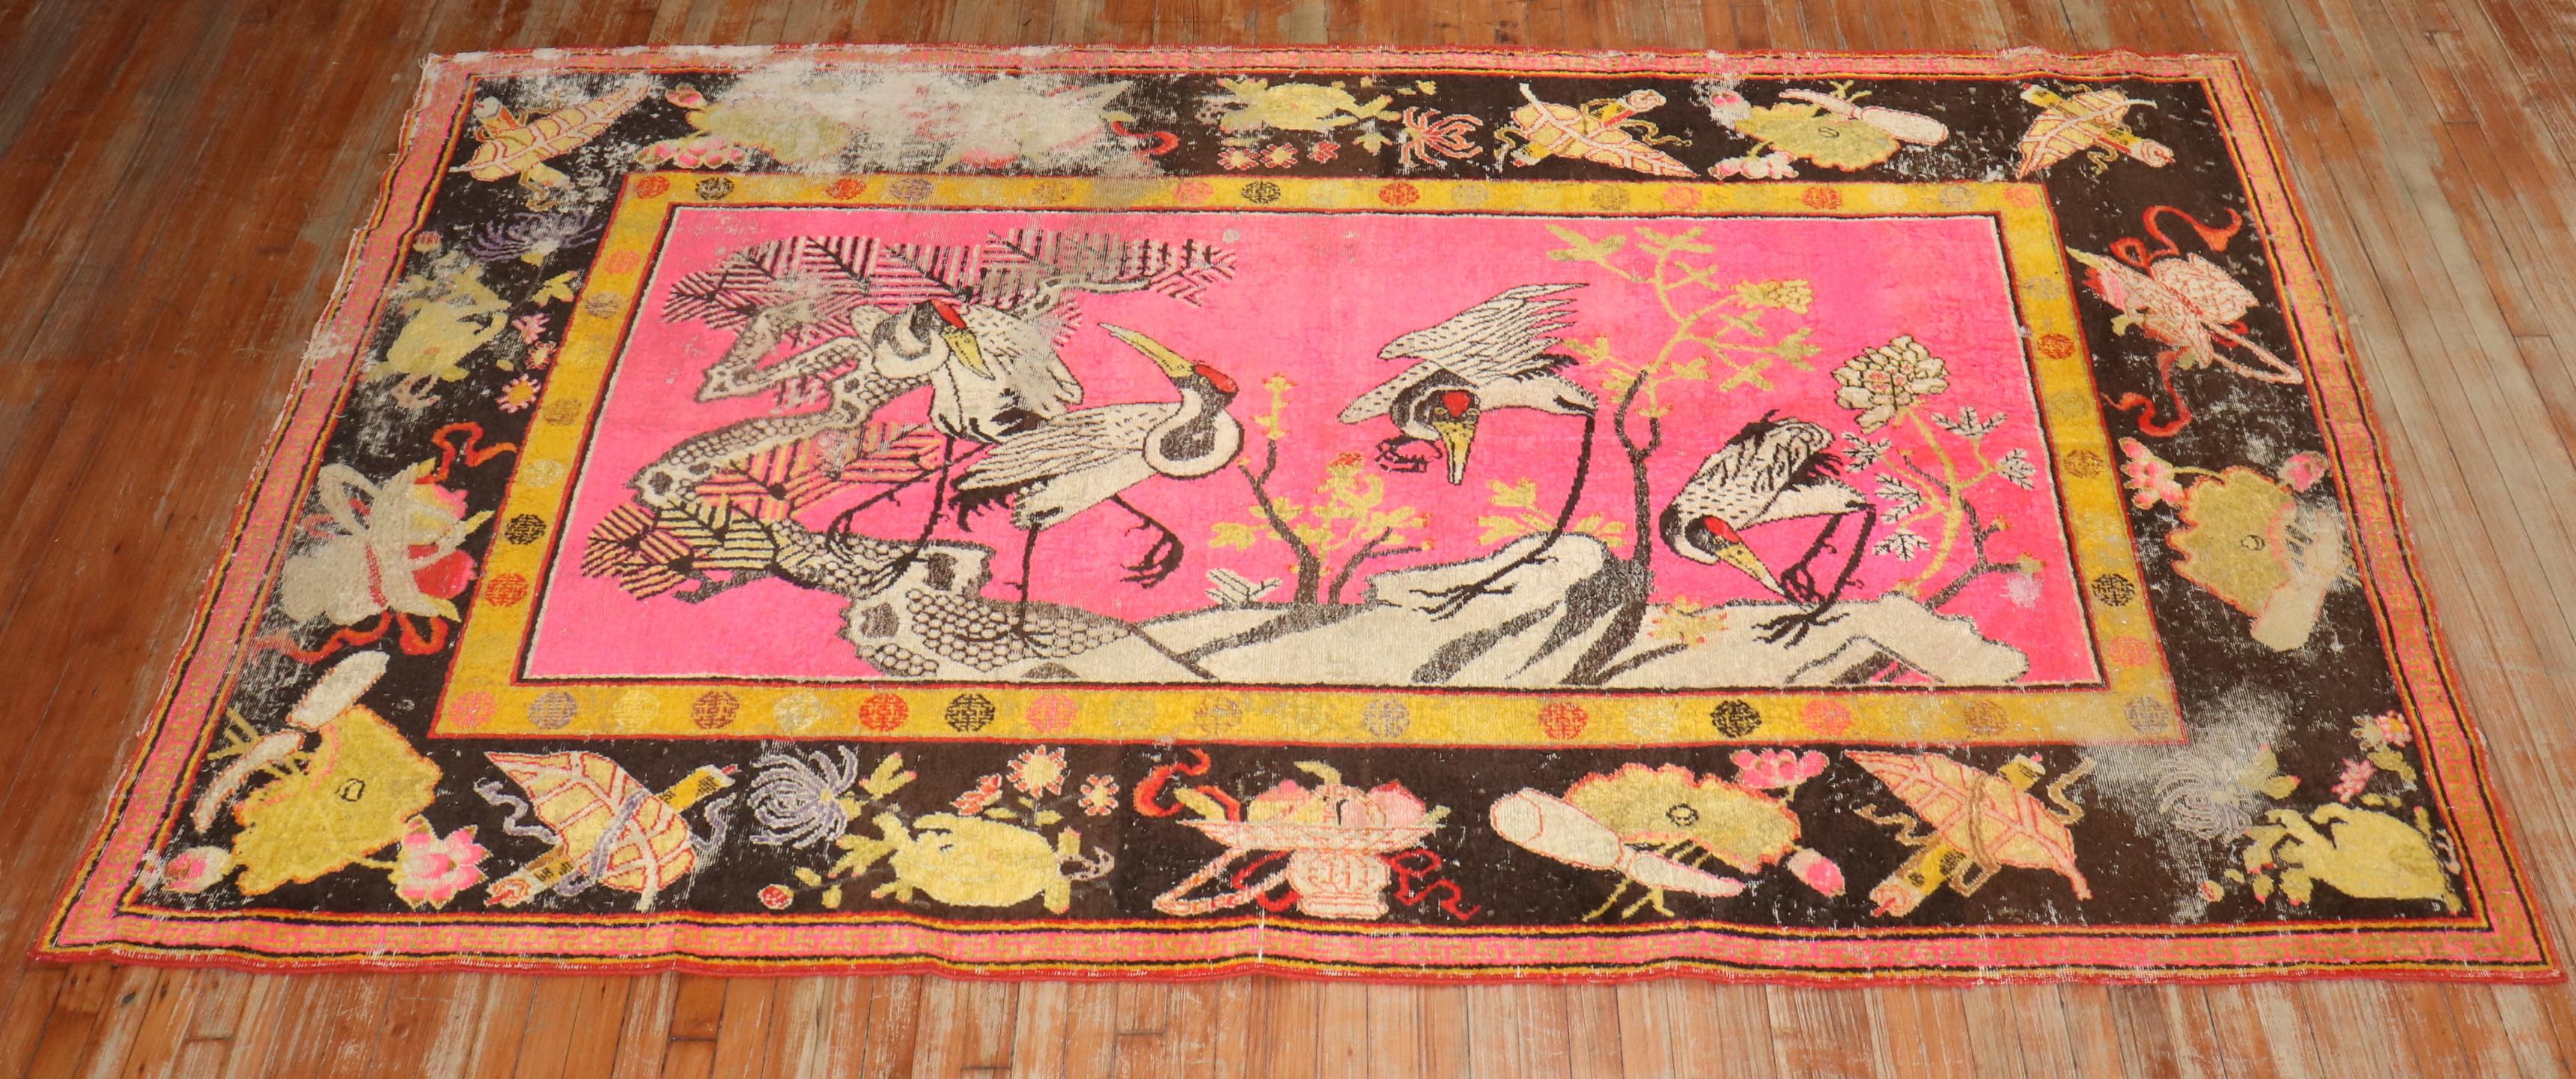 Zabihi Collection Bright Pink Antique Worn Flamingo Pictorial Khotan Rug For Sale 9